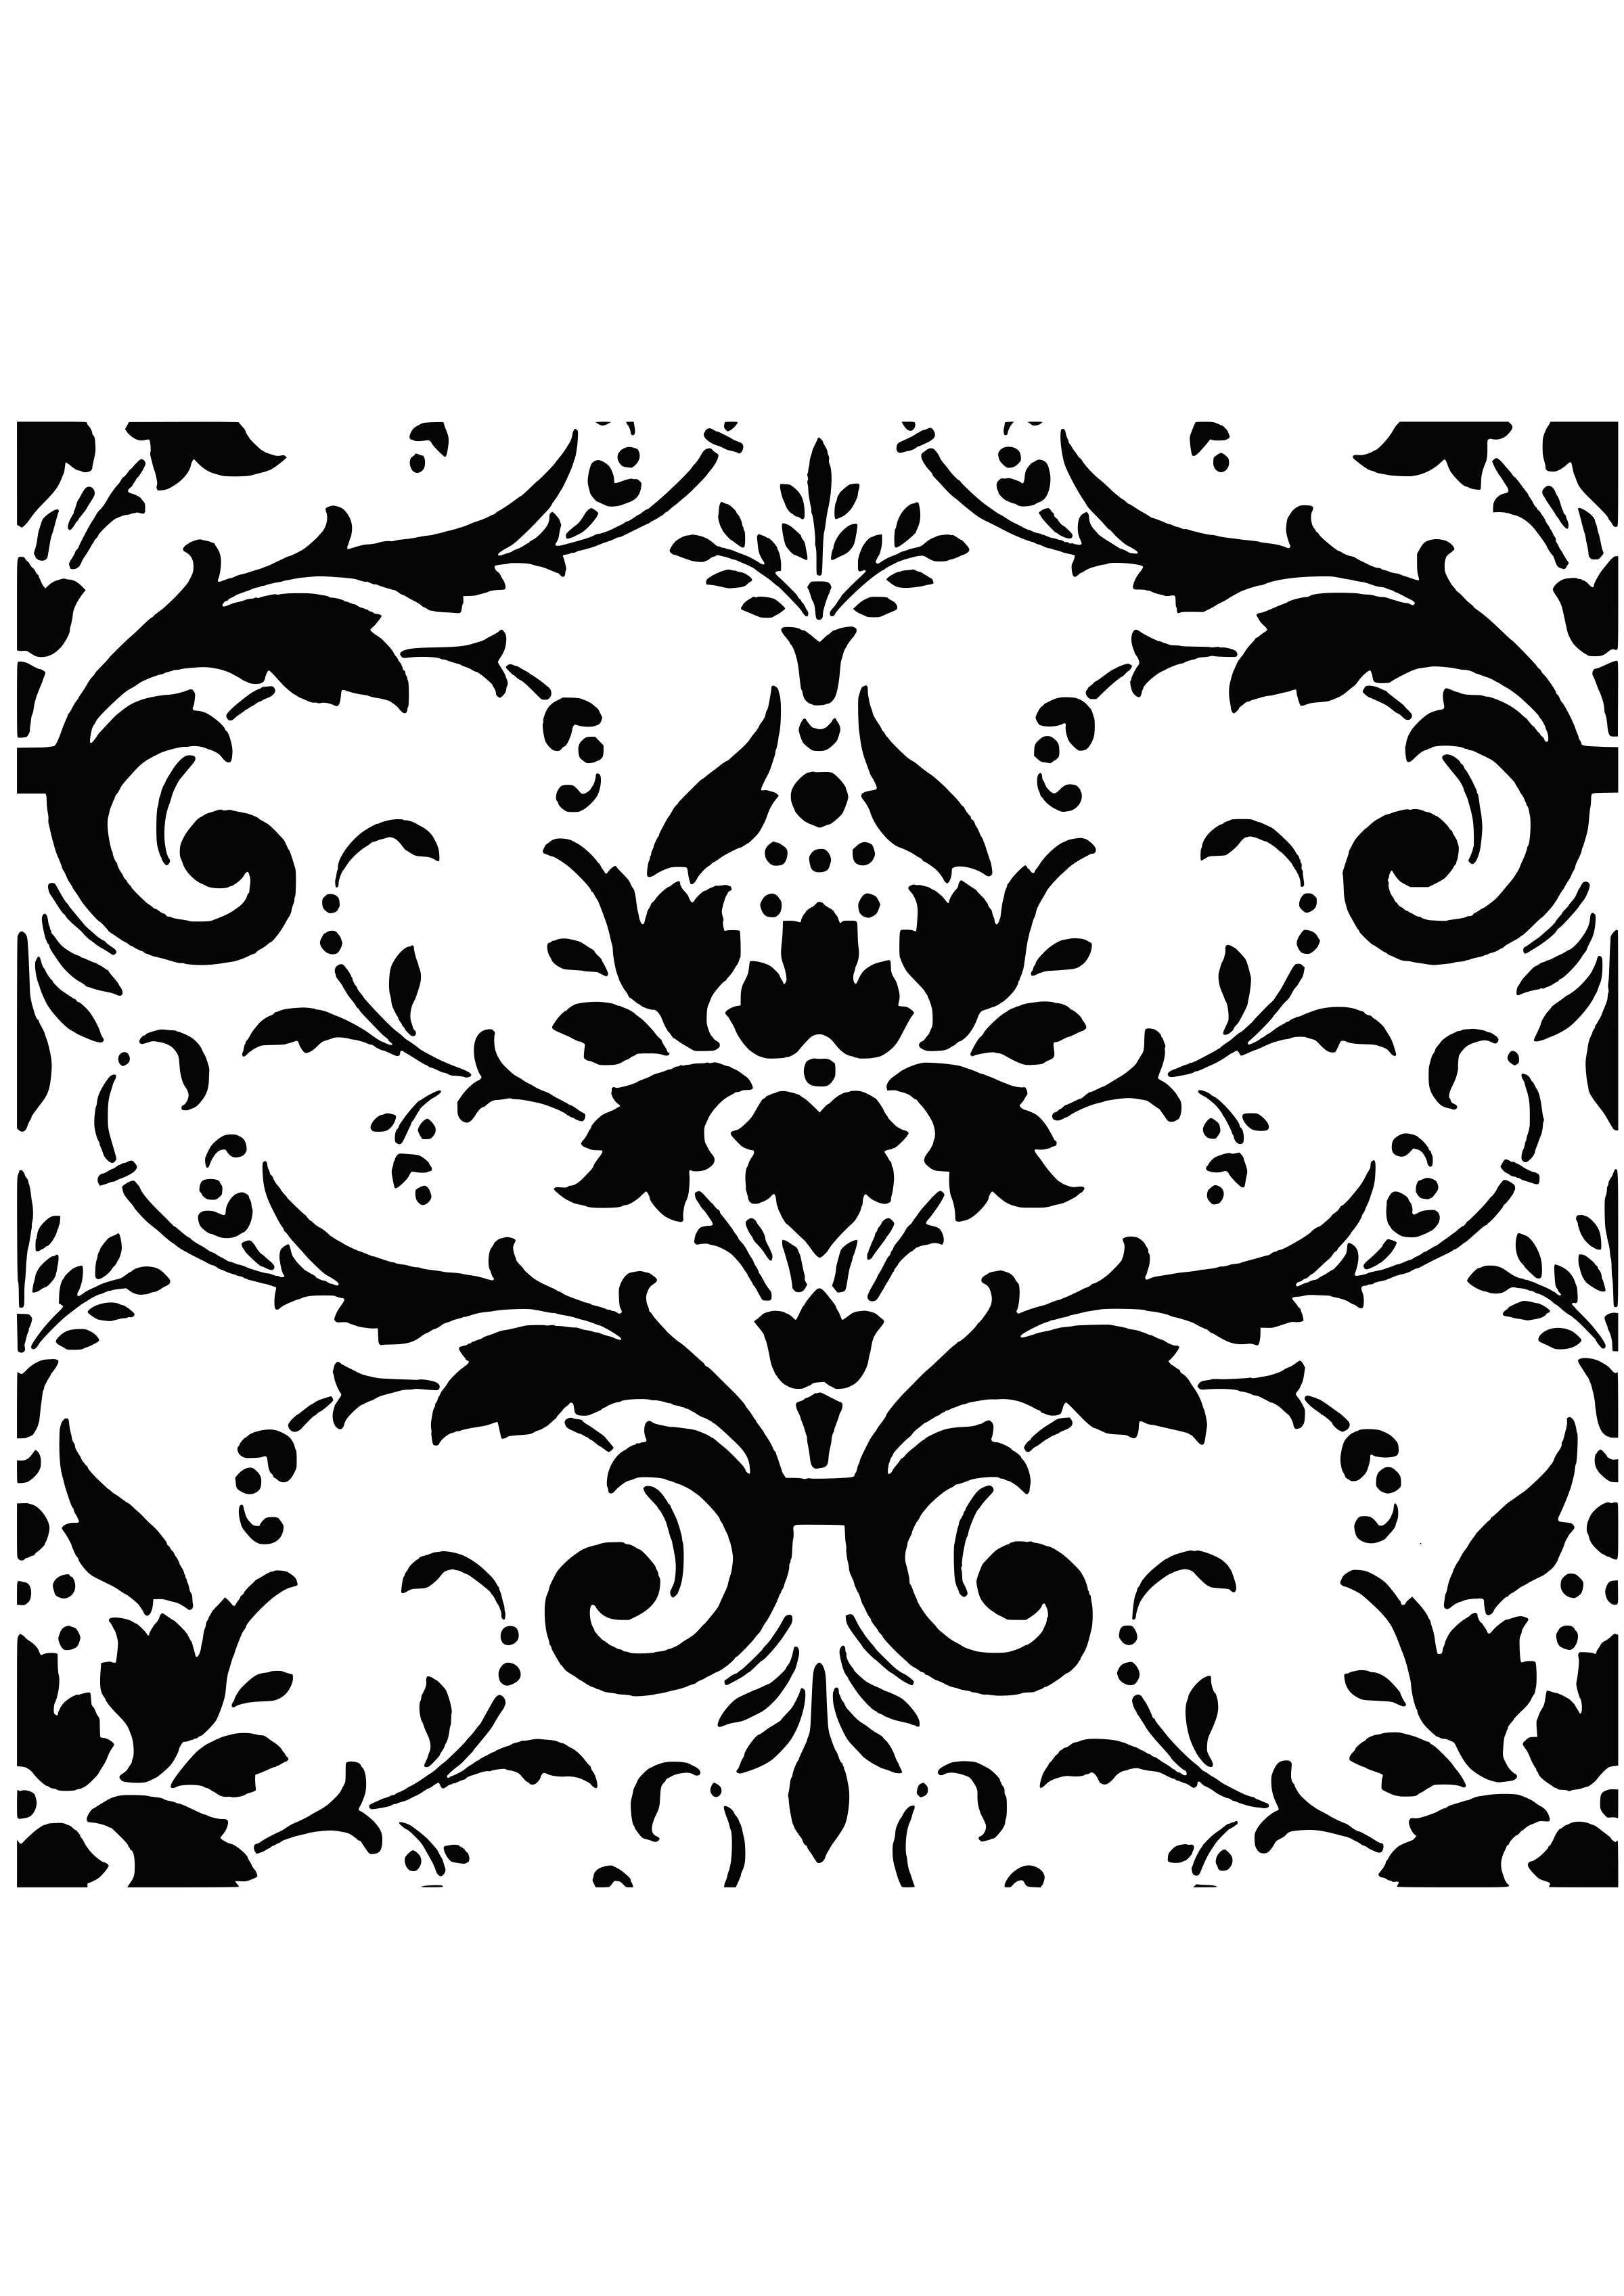 Big image png. Scroll clipart damask